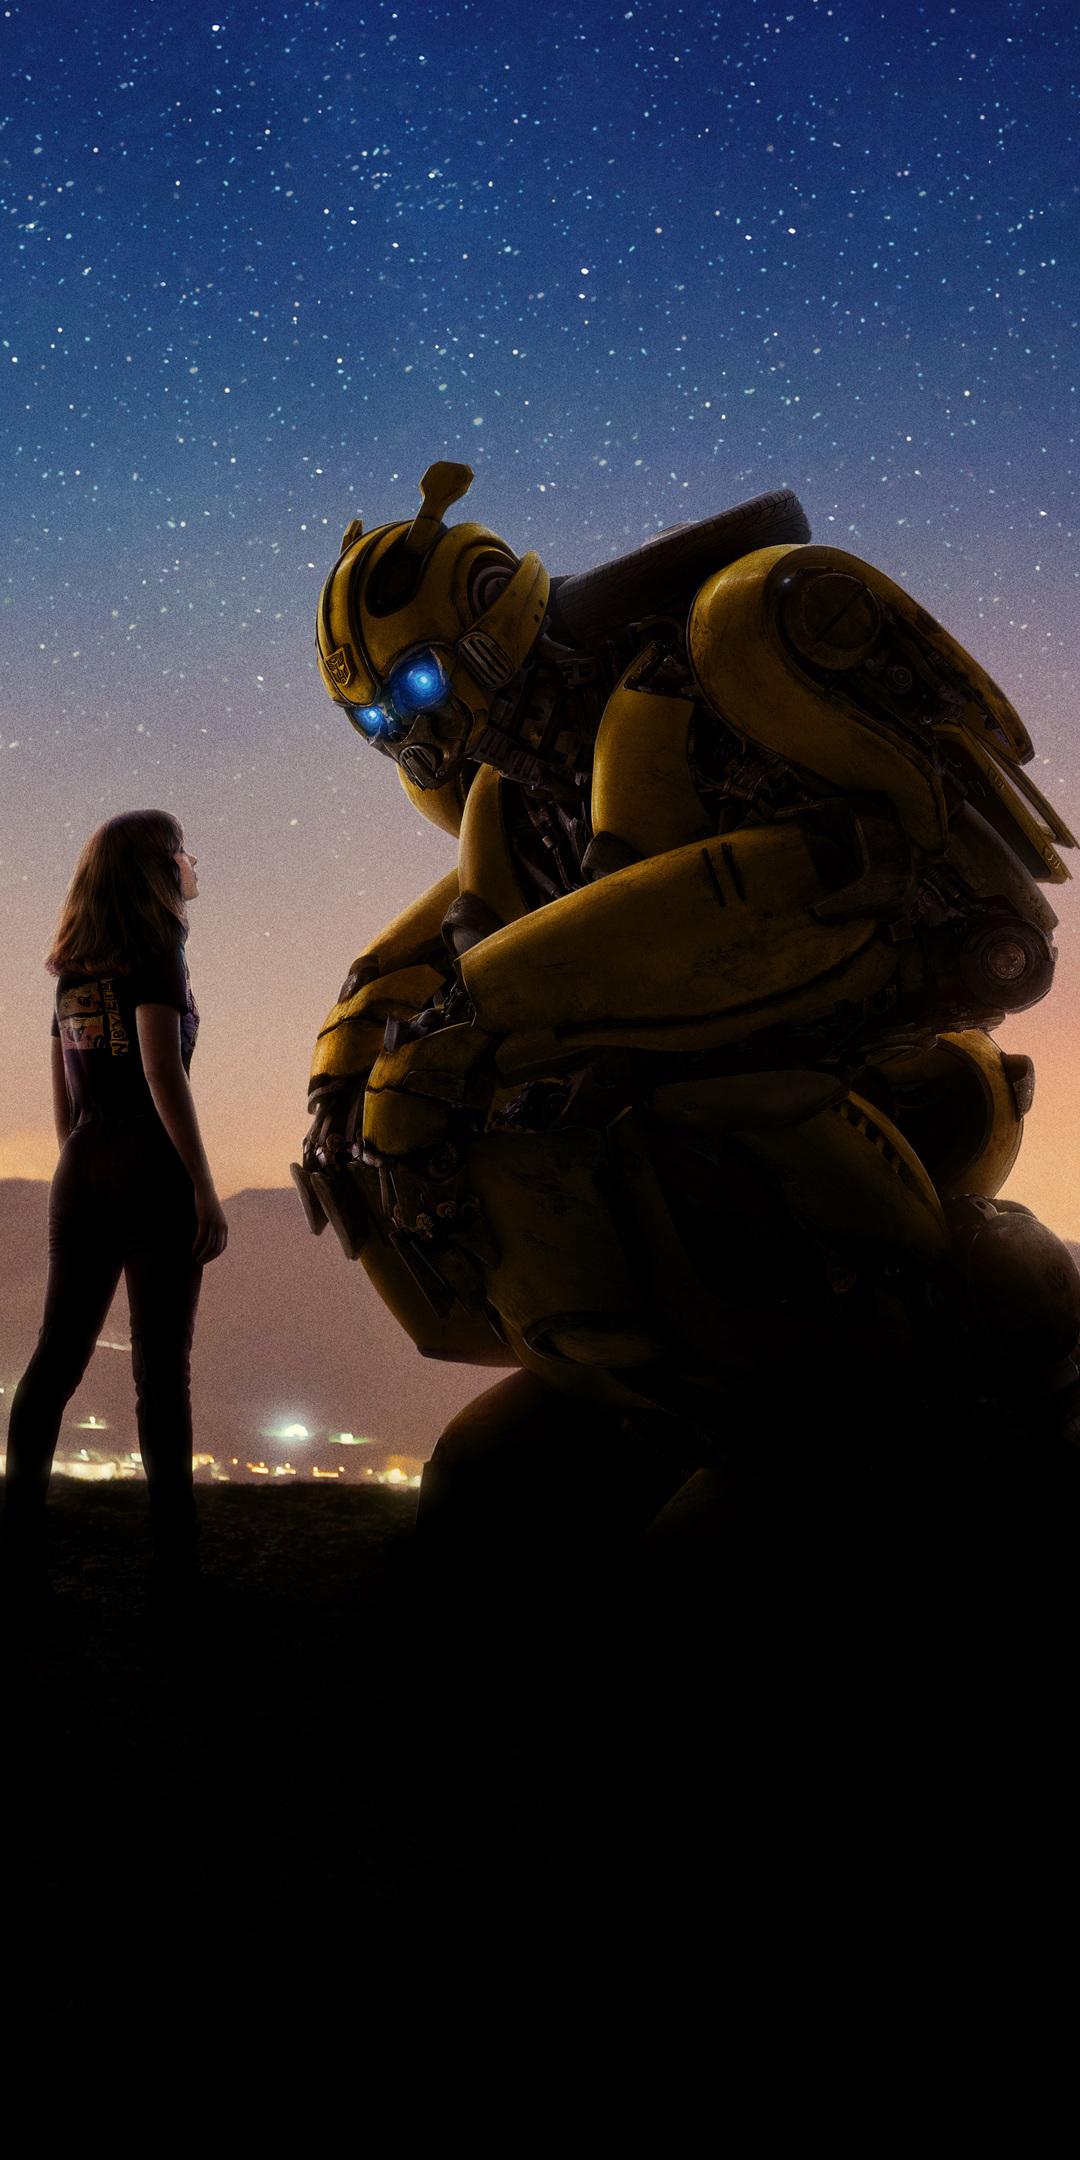 Bumblebee Movie 2018 Cool New Poster 5k One Plus 5T, Honor